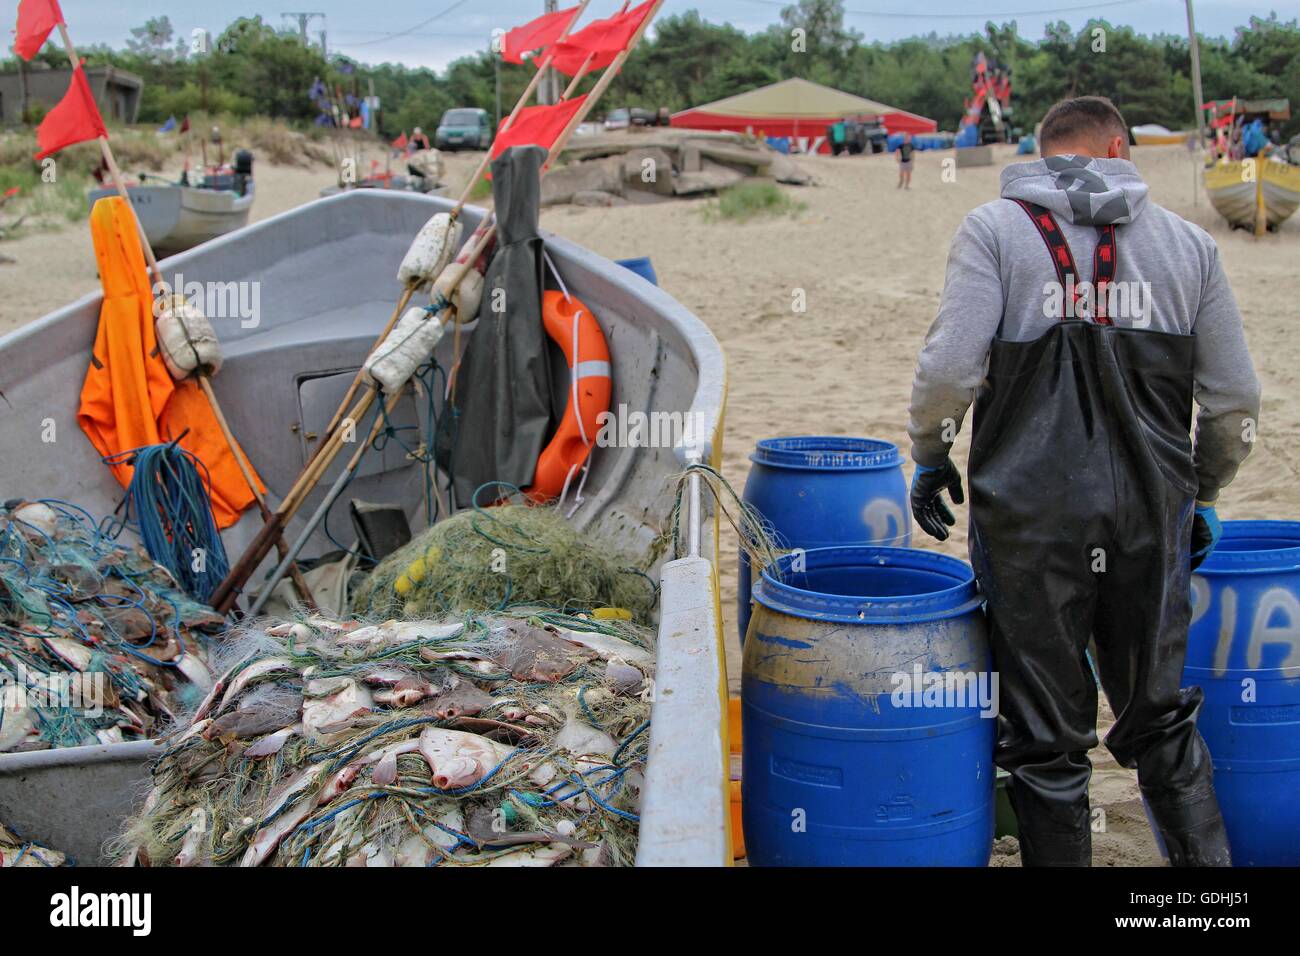 Piaski, Poland 17th, July 2016 Fishermen in Piaski return from the Baltic sea with caught flounders. Flounders (Platichthys flesus) and herring are the main basic species of fish caught this time of year in Baltic by Polish fishermen. Stock Photo